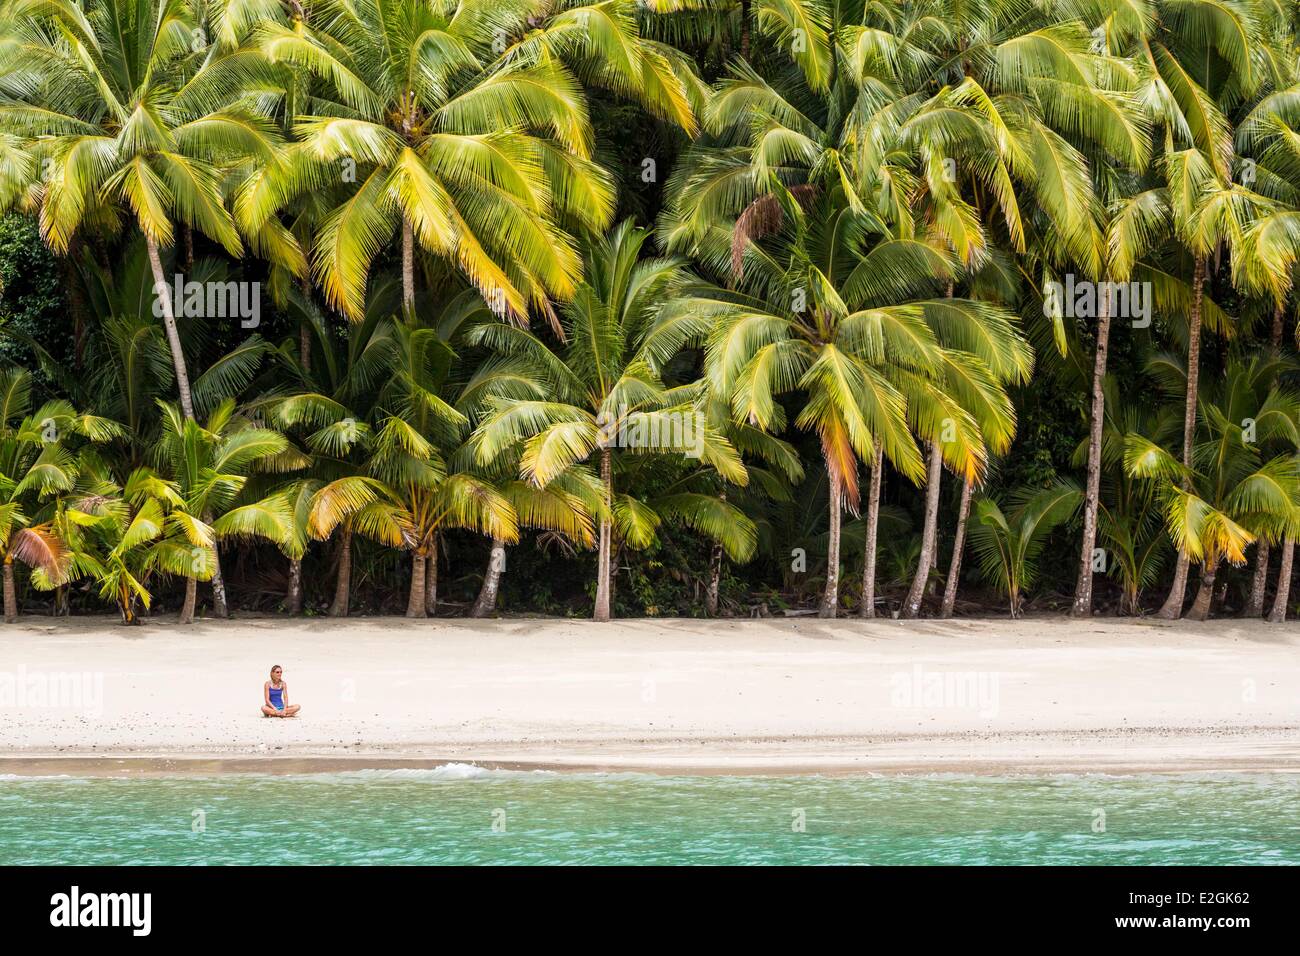 Panama Veraguas province Gulf of Chiriqui National Park of Coiba listed as World Heritage by UNESCO since 2005 Rancheria island palm-fringed beach Stock Photo